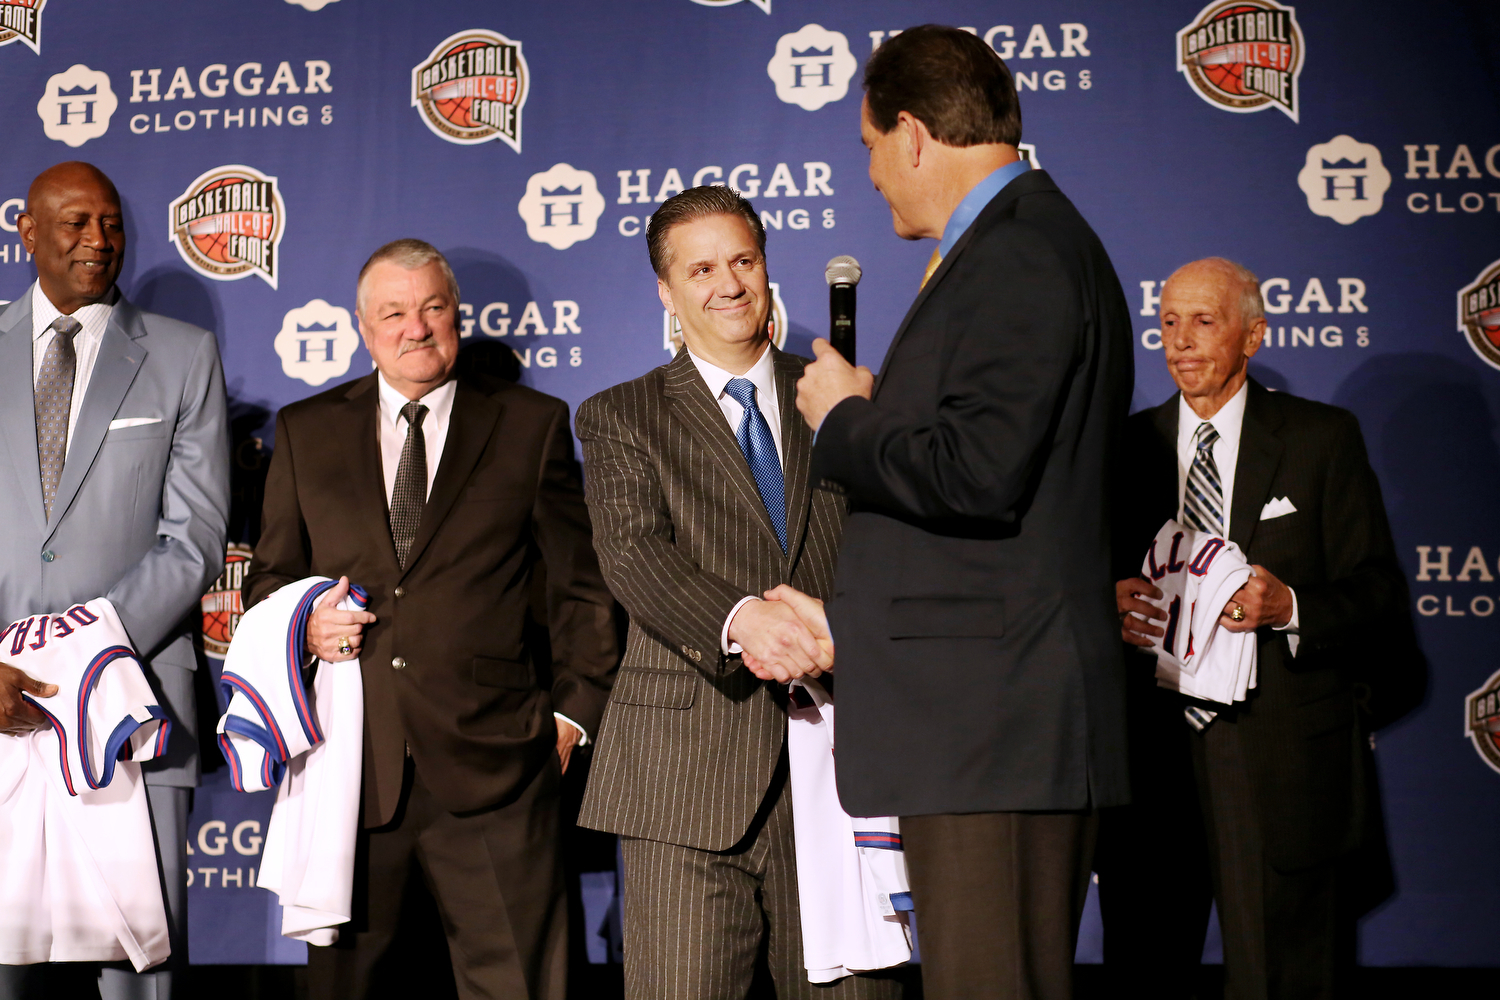 Calipari Wrestling With Hall of Fame Speech